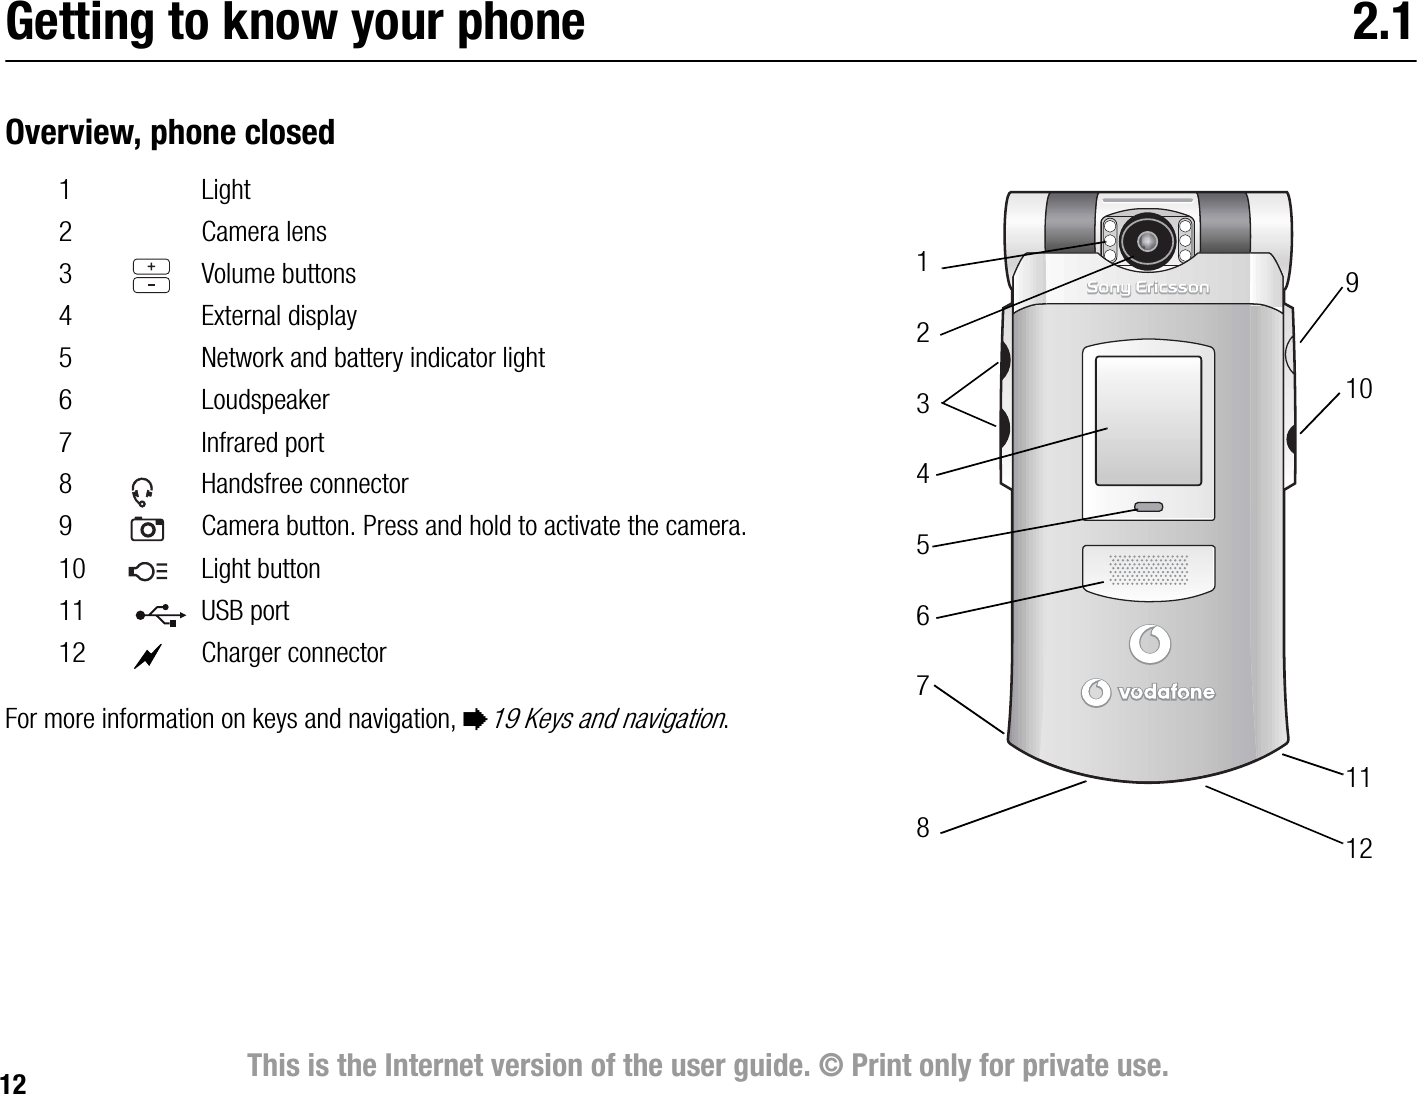 12 This is the Internet version of the user guide. © Print only for private use.Getting to know your phone 2.1Overview, phone closedFor more information on keys and navigation, %19 Keys and navigation.1 Light2 Camera lens 3 Volume buttons4 External display5 Network and battery indicator light6 Loudspeaker7 Infrared port8 Handsfree connector9 Camera button. Press and hold to activate the camera.10 Light button11 USB port12 Charger connector123456789101112